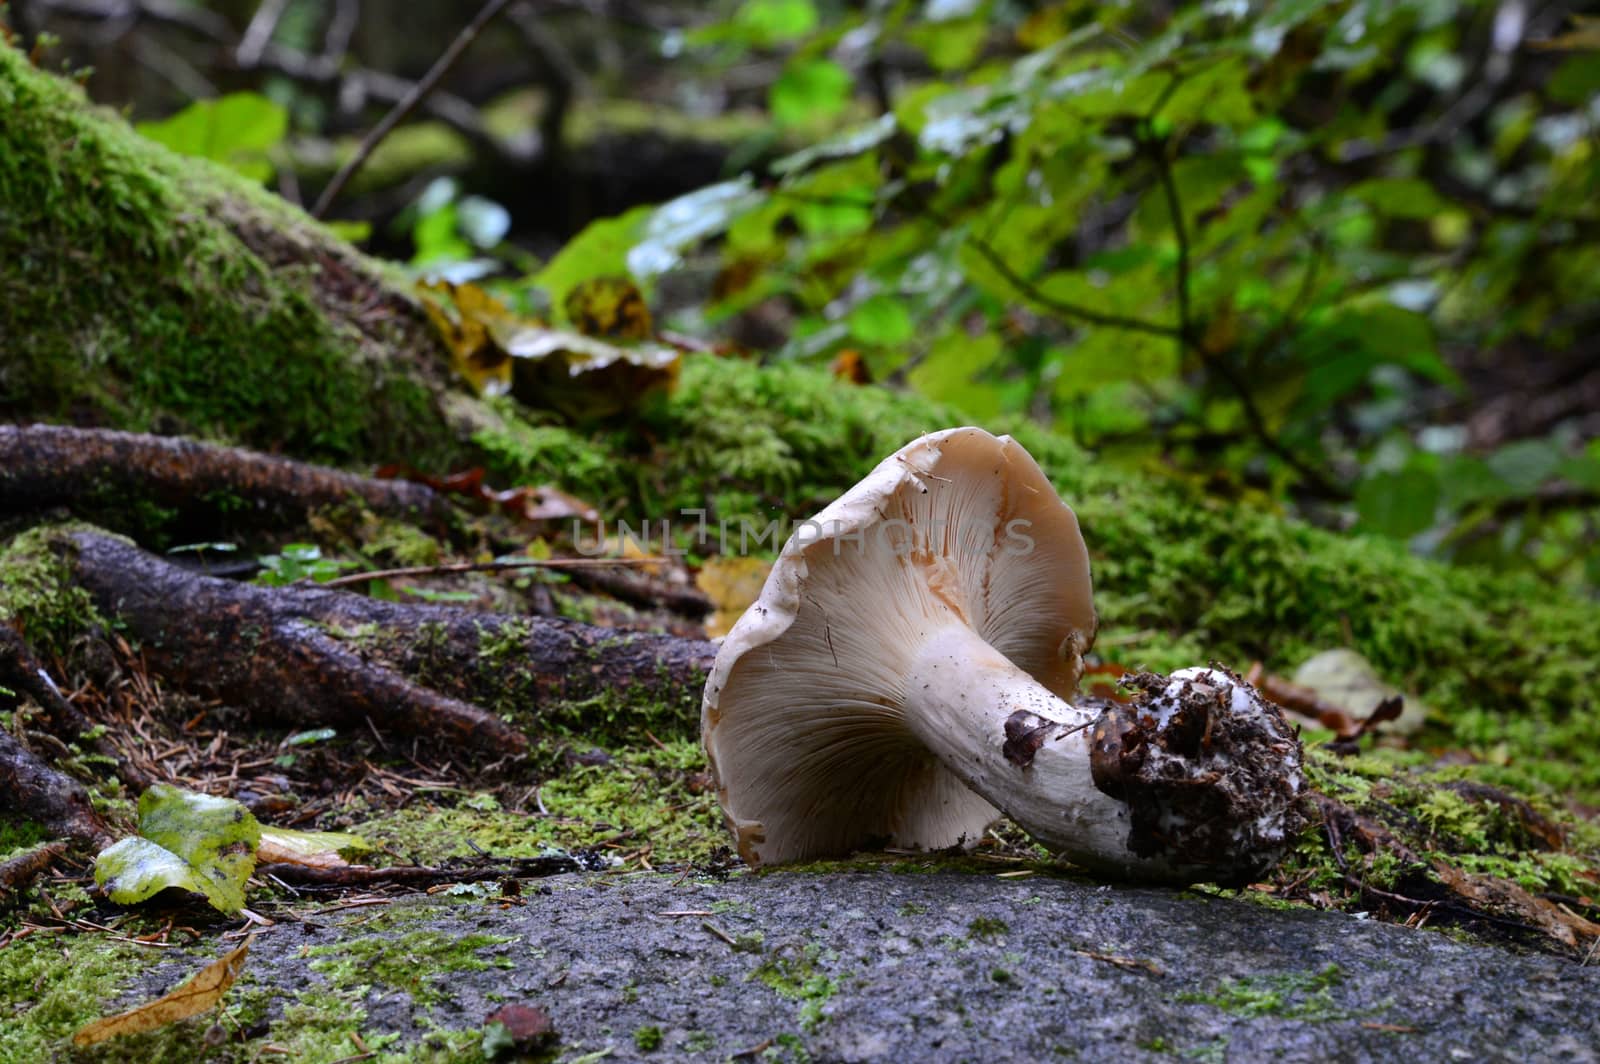 Photo of a mushroom on the rock. Taken in the forest of Sigulda city, Latvia.